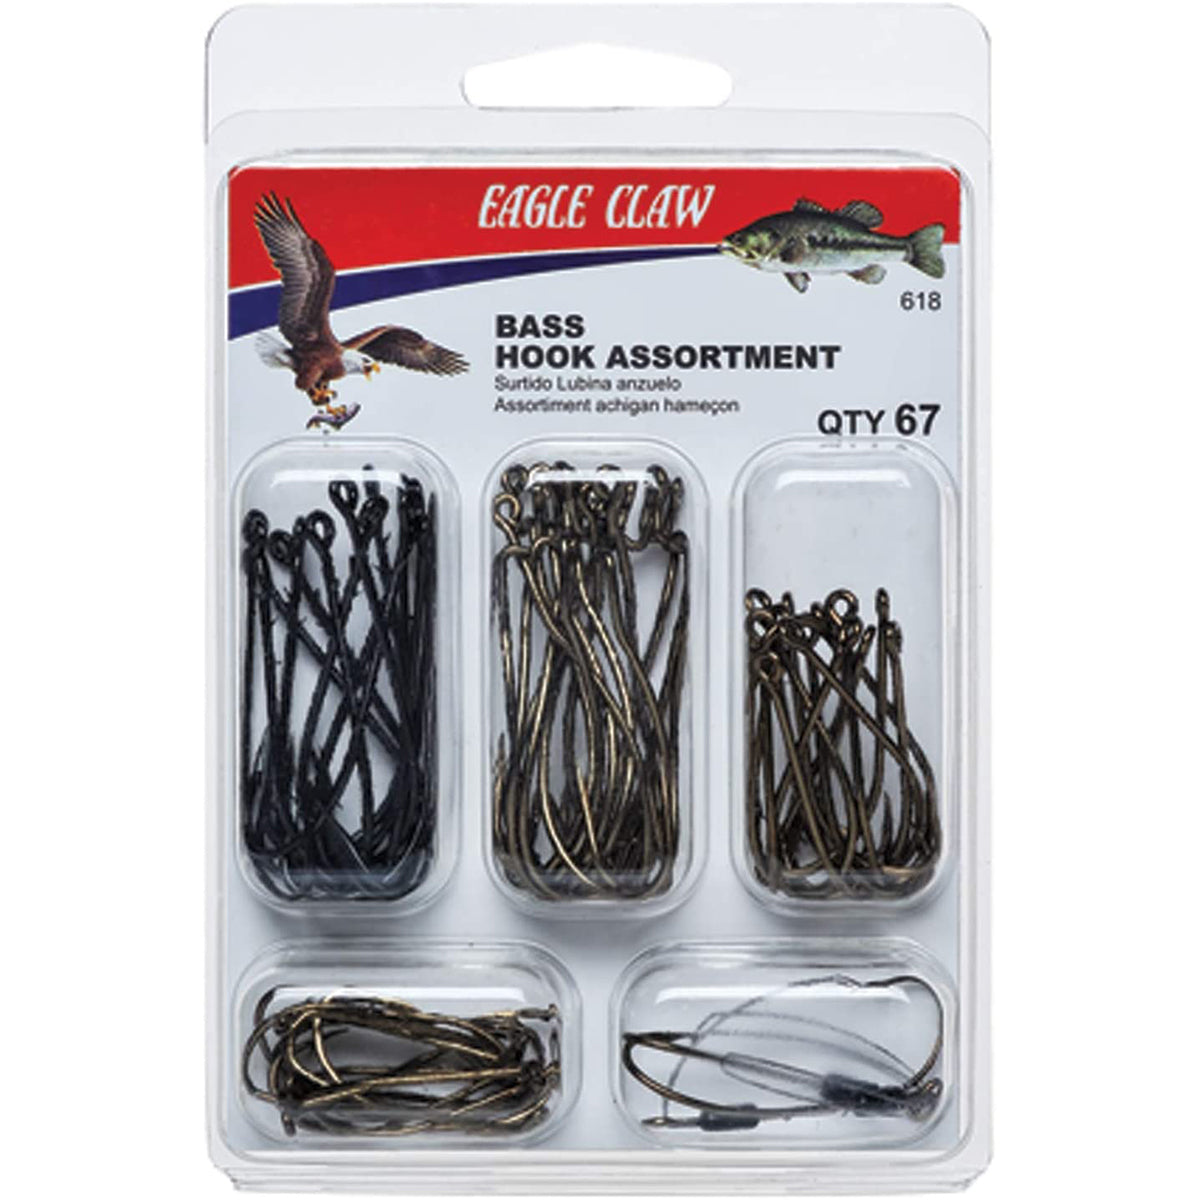 Eagle Claw Bass Assorted Hooks Fishing Kit Eagle Claw